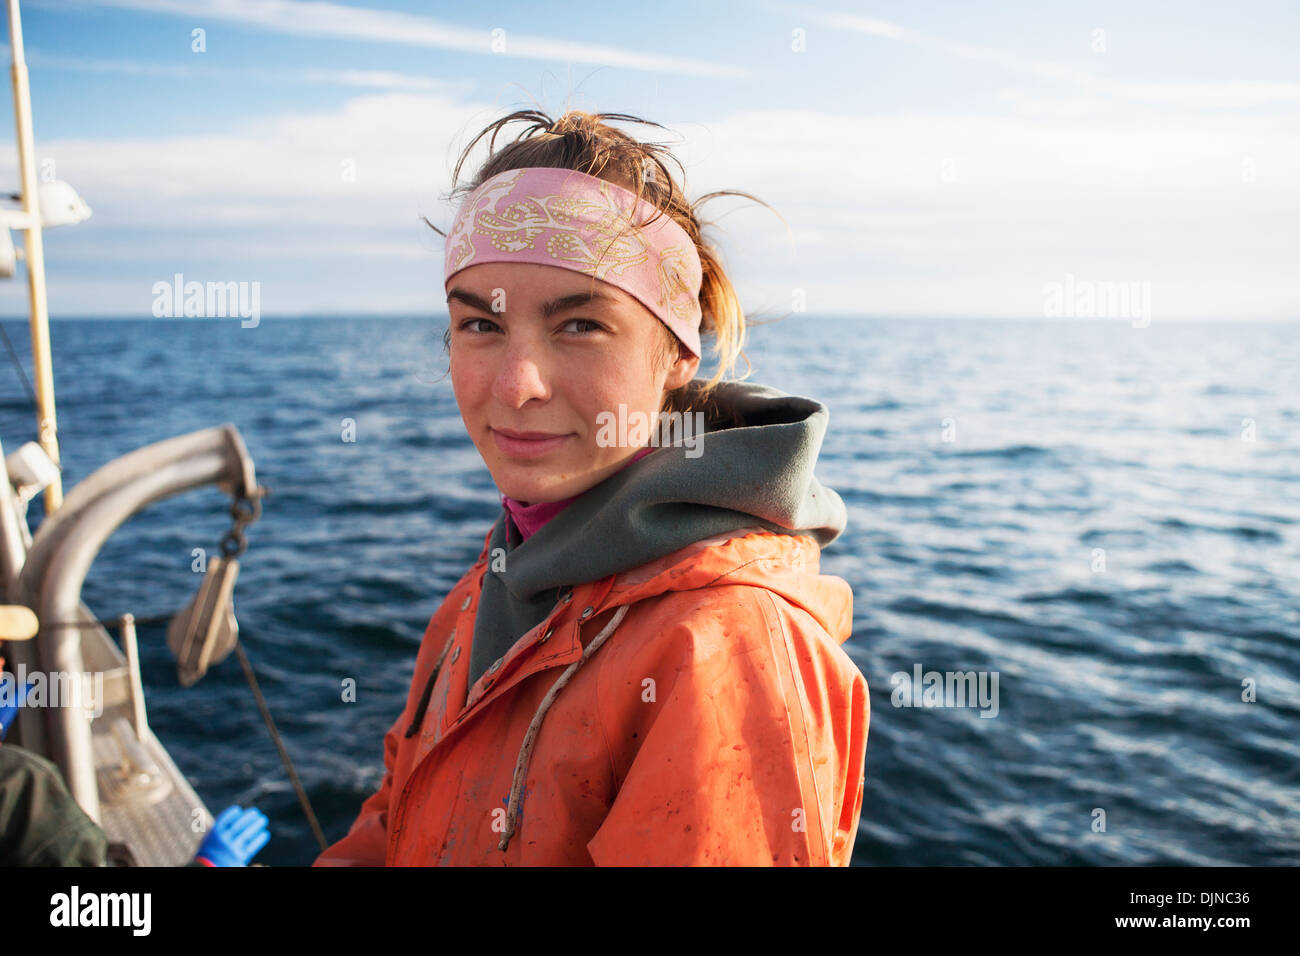 Portrait Of Claire Laukitis Commercial Fishing For Halibut In Southwest Alaska, Summer. Stock Photo